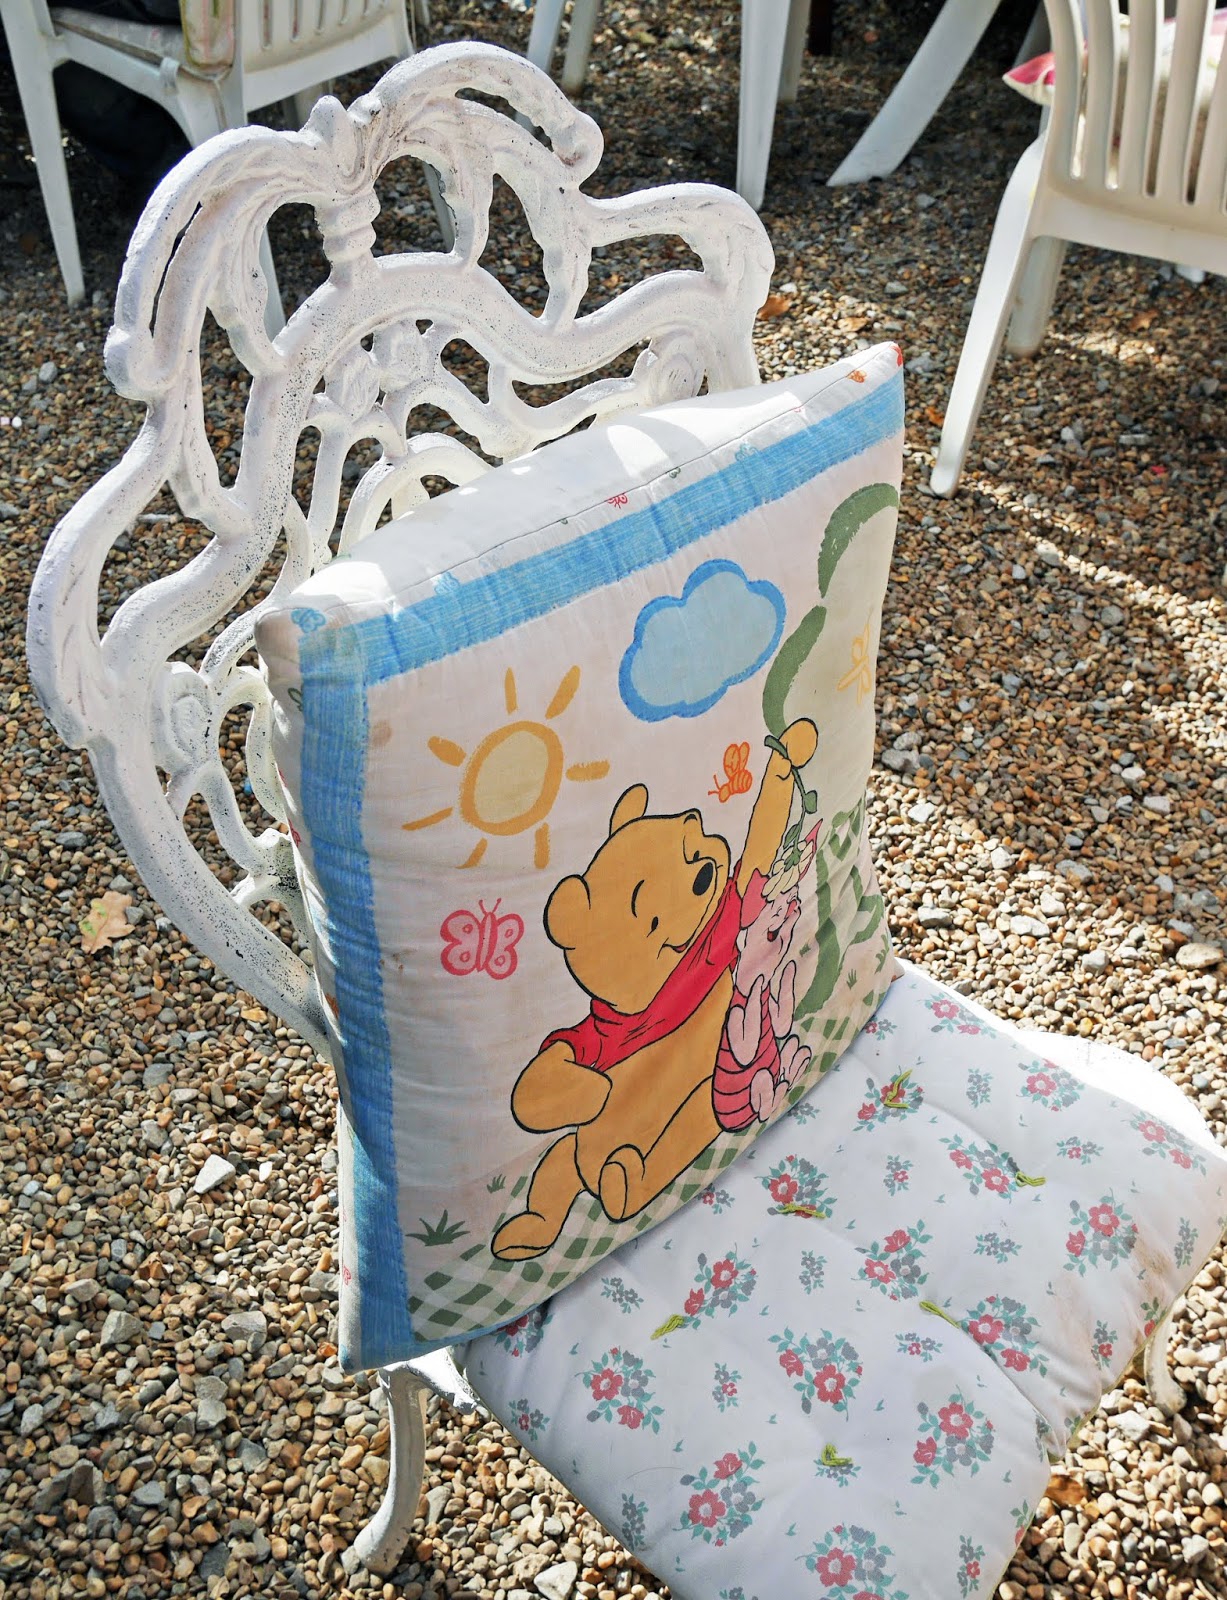 Winnie the Pooh cushion at Piglet's Tearoom in Ashdown Forest